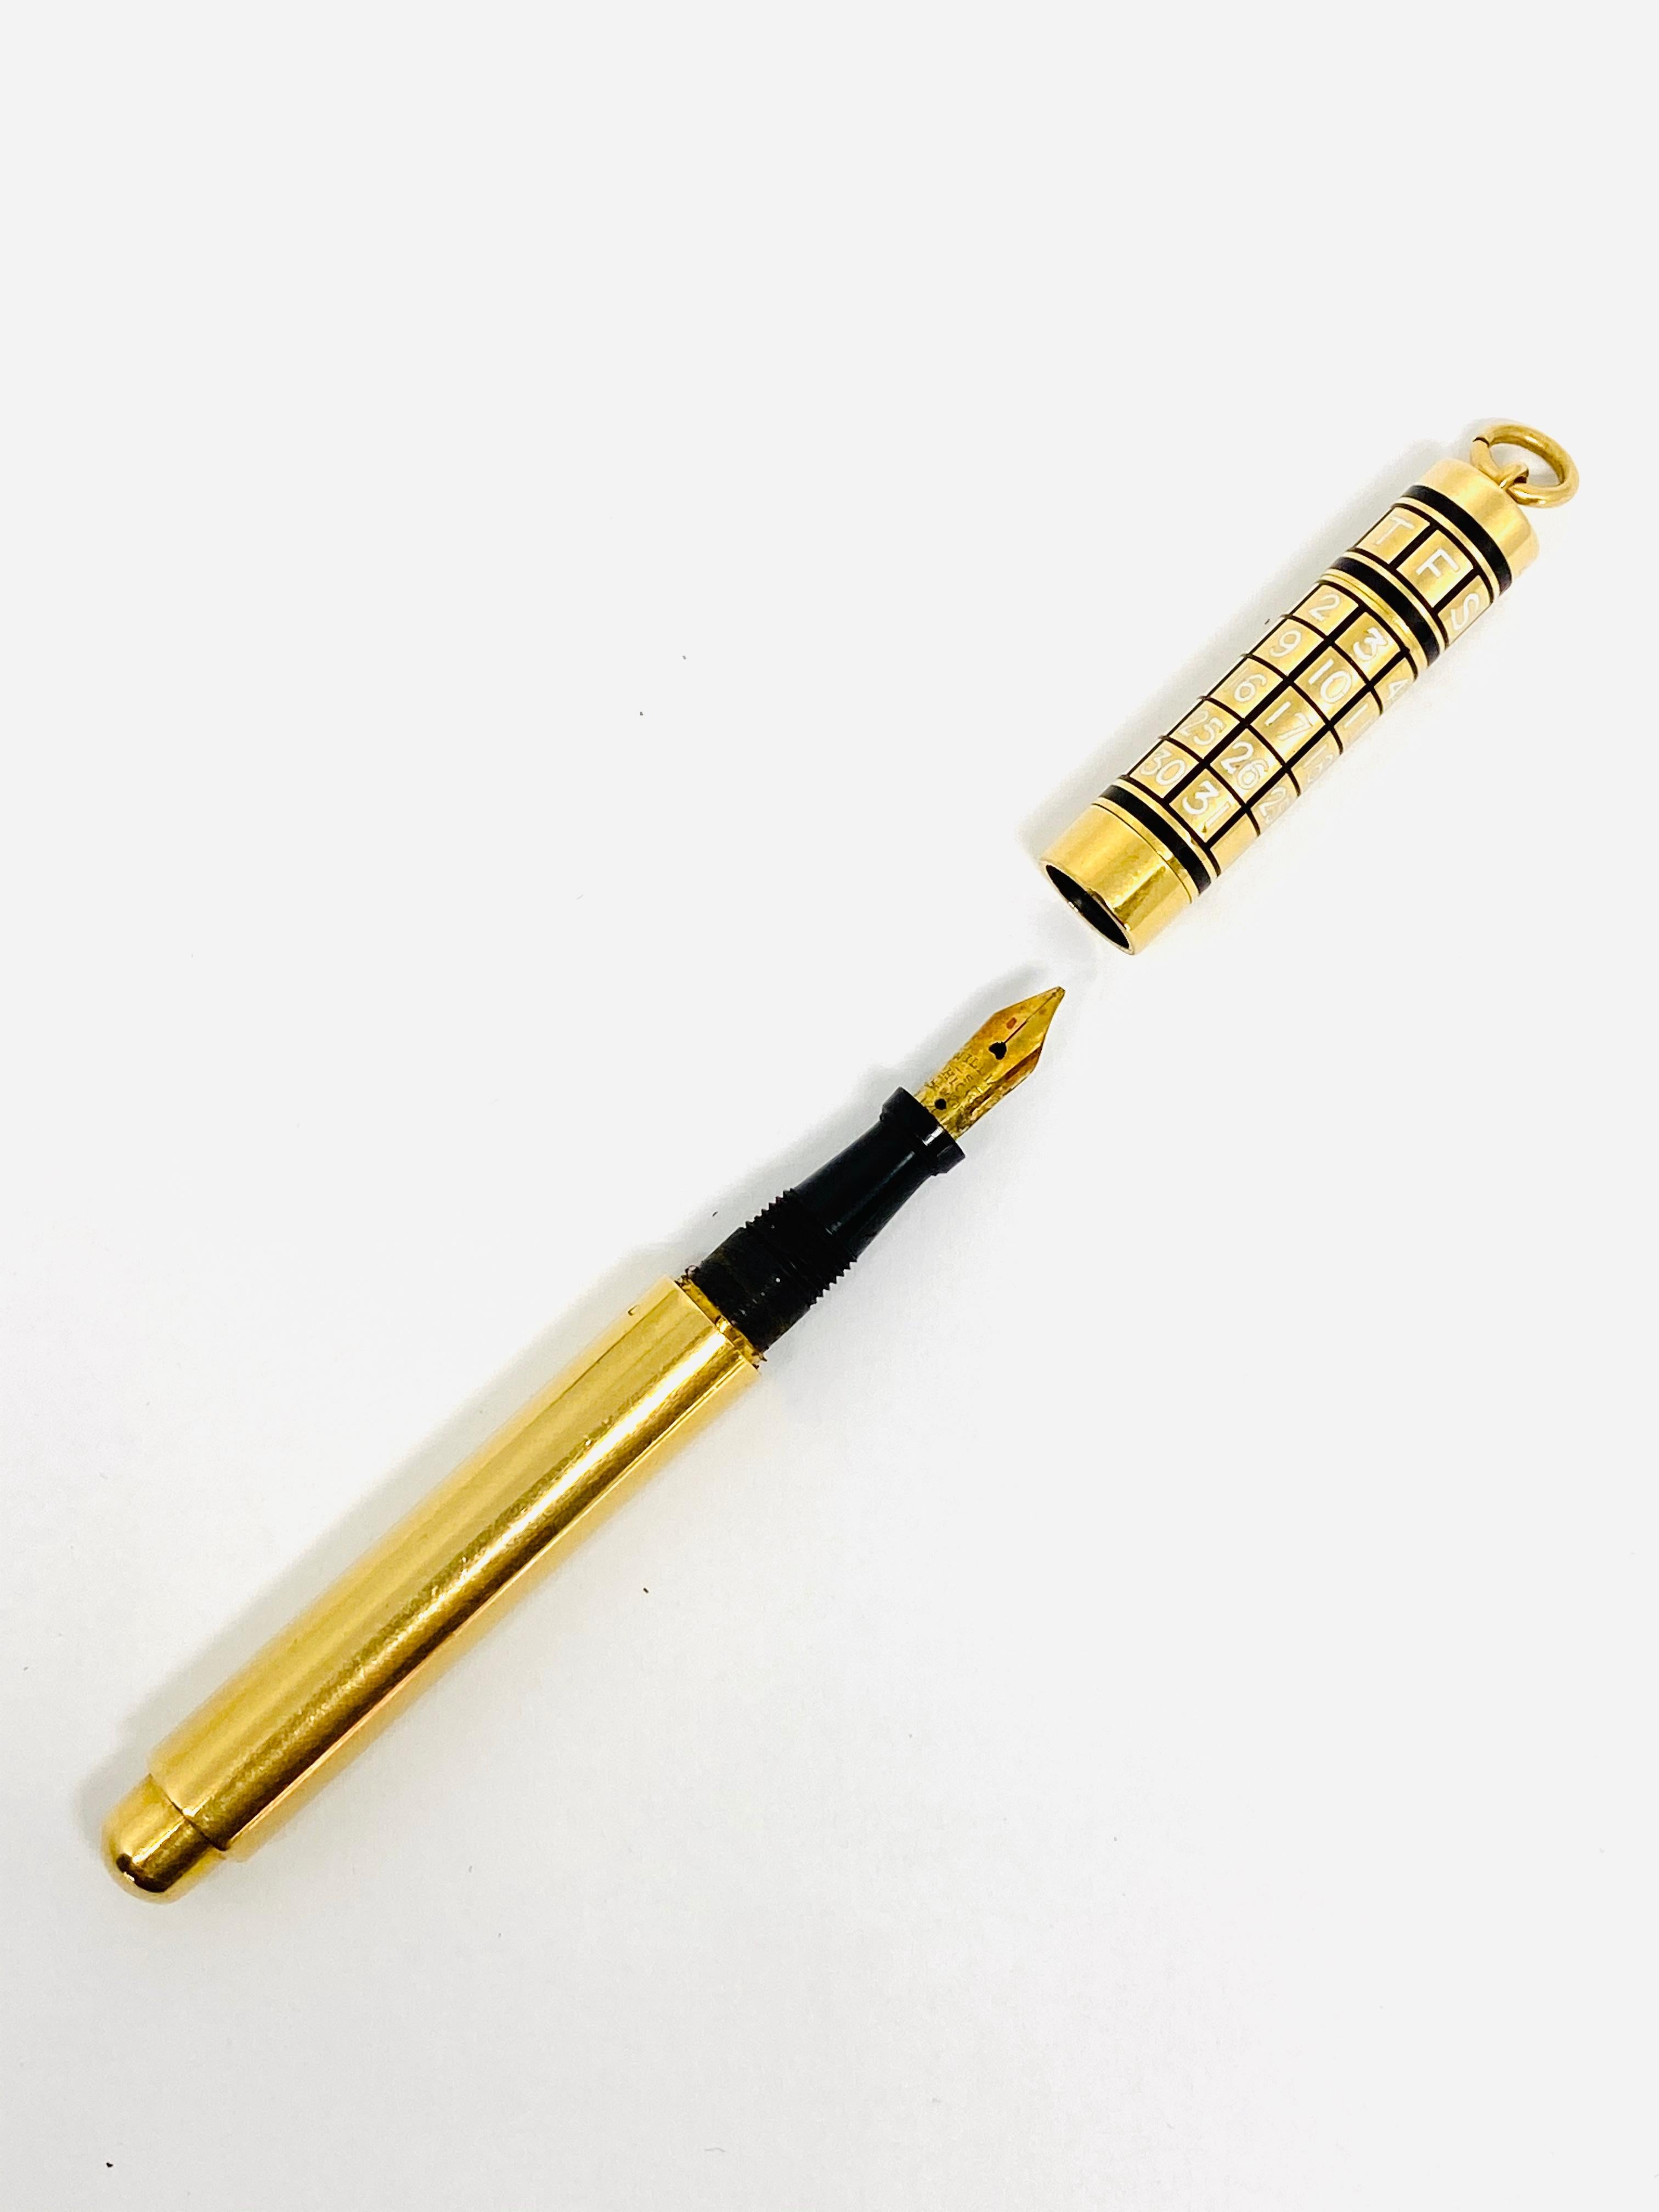 Circa 1950 CARTIER 14K Yellow Gold and Enamel Fountain Pen and Calendar Pendant

Product details:
3 in 1: fountain pain, enamel calendar and pendant
The pendant is 14K yellow gold (tested)
The pen is removable if needed and the ink can be